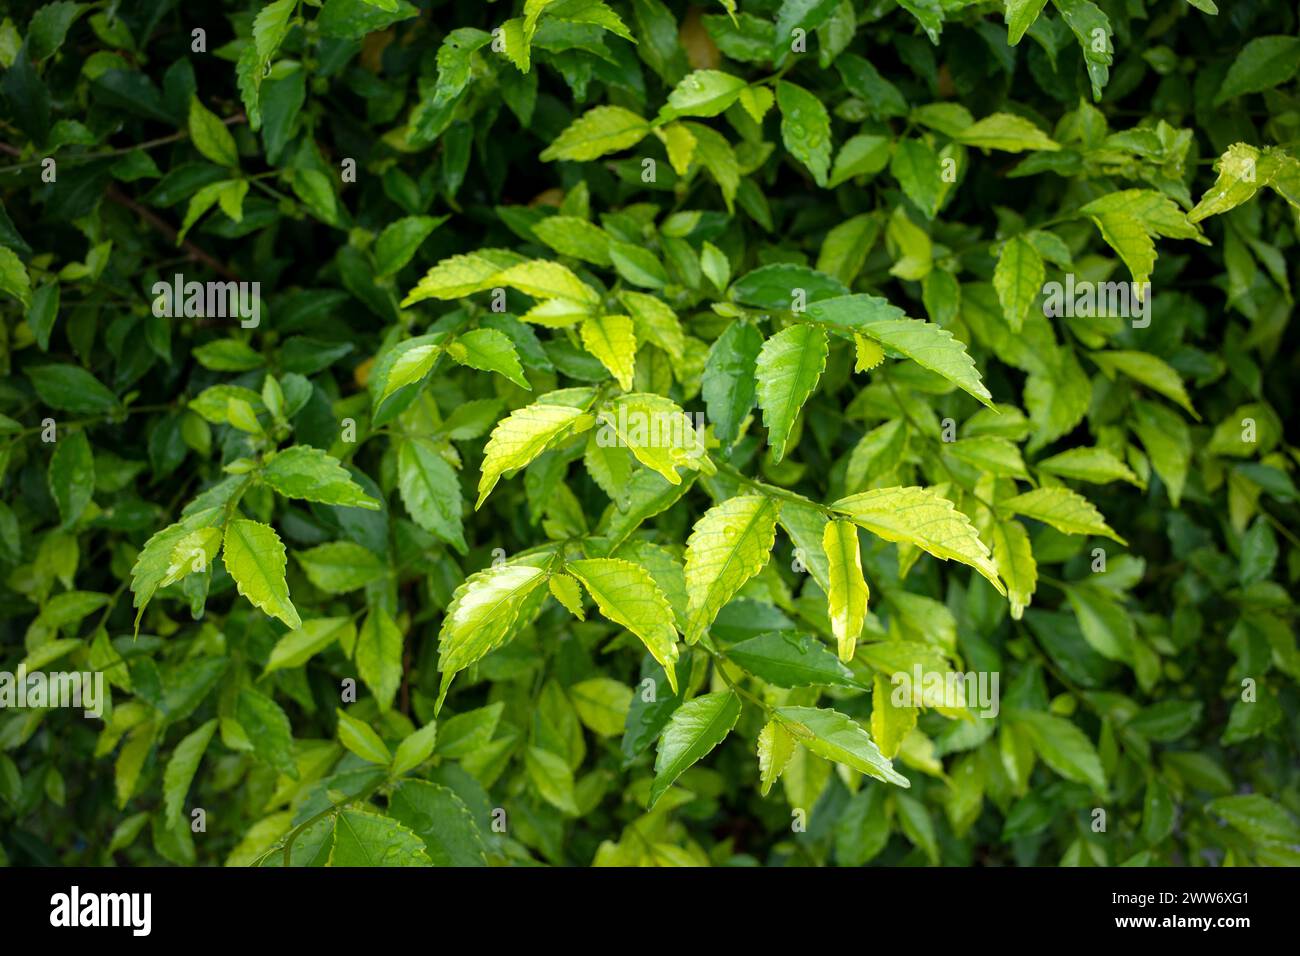 Teh-tehan, Acalypha siamensis or forest tea, usually used as a hedge and ornamental plant. Stock Photo